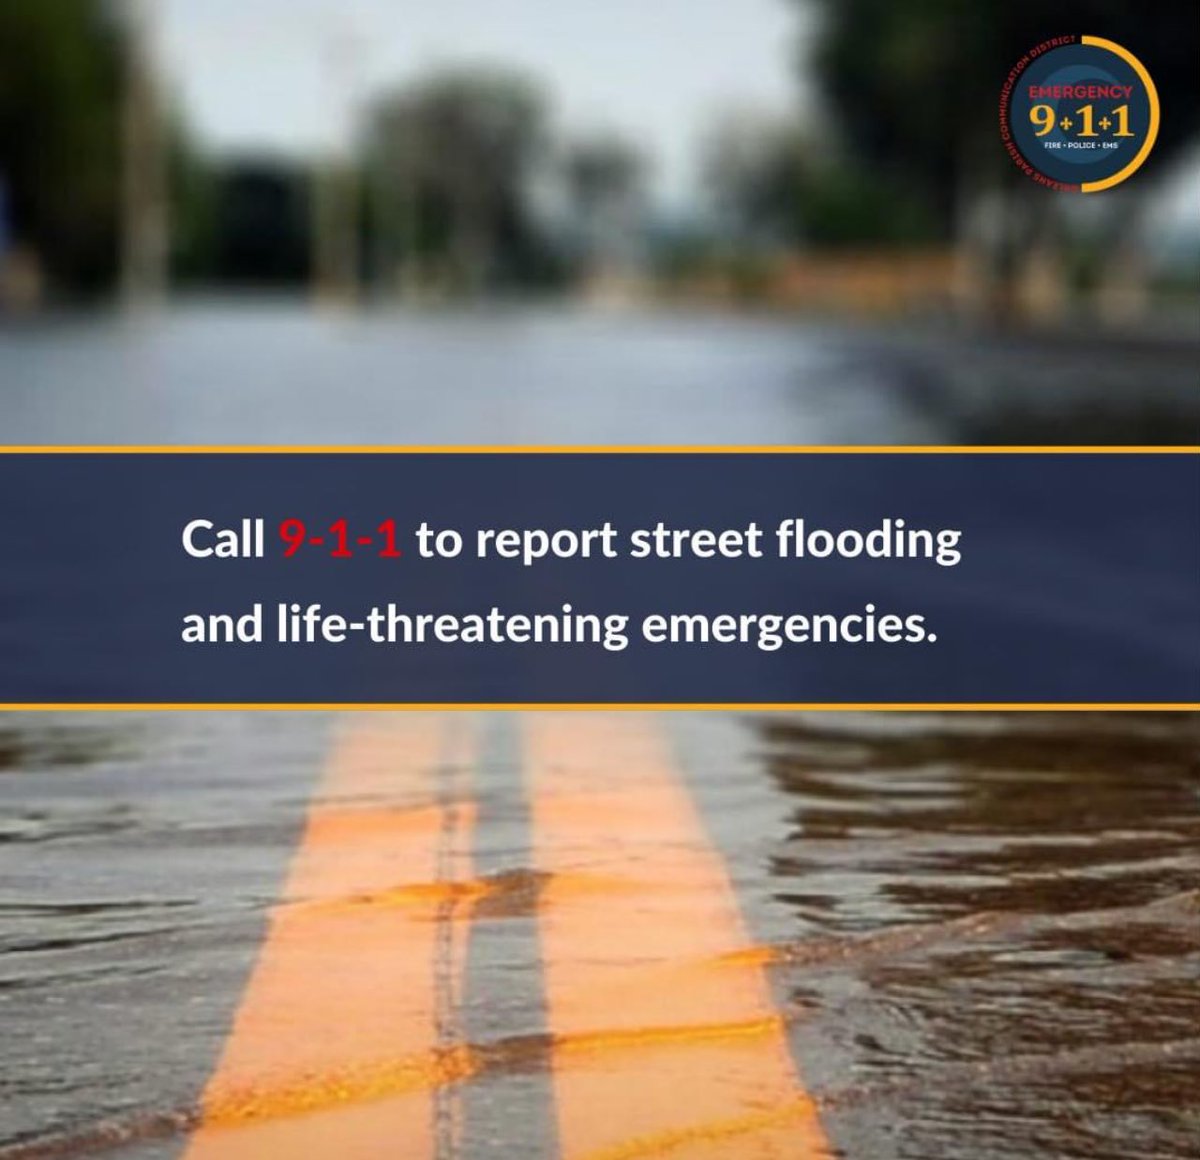 Call 9-1-1 to report street flooding and life-threatening emergencies. @opcd911